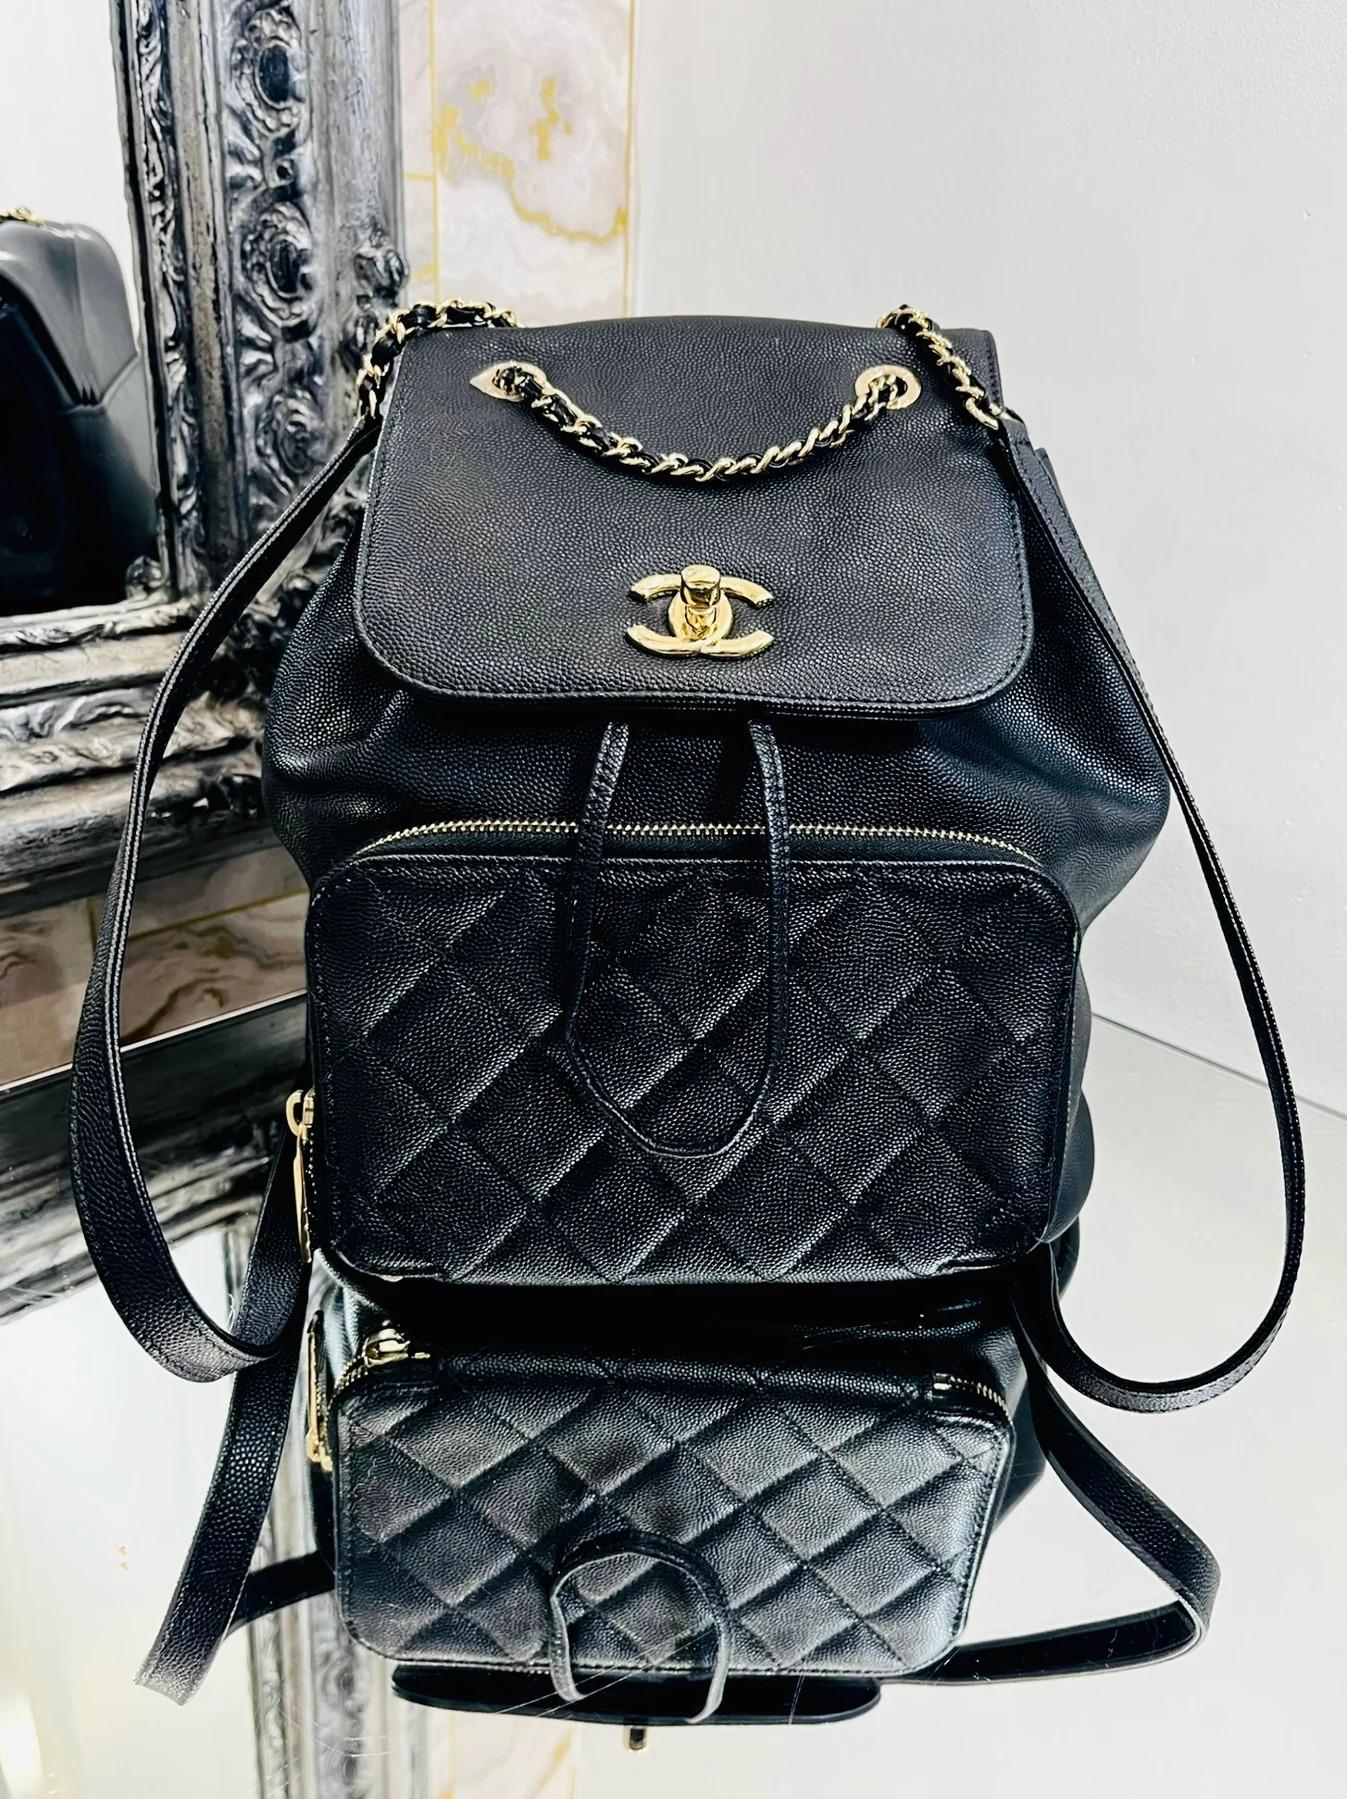 Chanel Affinity Caviar Leather Backpack

Caviar and quilted, diamond stitch leather with champagne gold 'CC' logo hardware. Timeless twist lock closure, Drawstring pull, zipper compartment to front and open back pocket to rear.

Additional